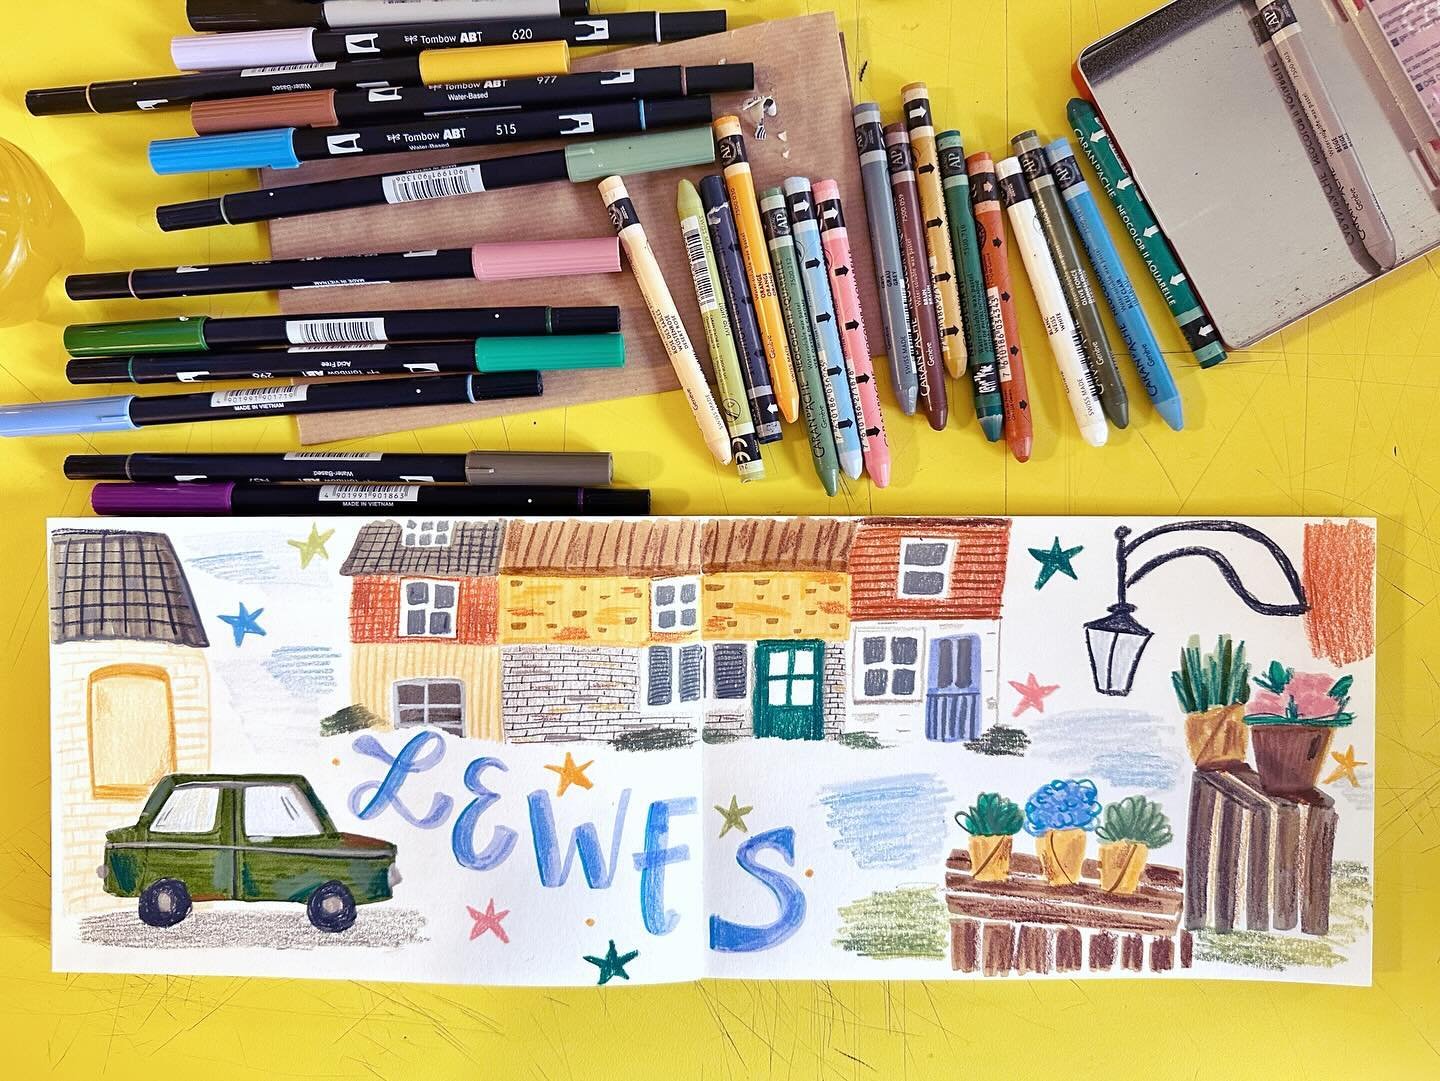 Using this yellow table as pretend sunshine today while I wait for some British rain to start falling 🌧️

Sketchbook spread from Tuesday&rsquo;s wandering around Lewes&hellip;

#theydrawandtravel #lewes #walktosee #walkanddraw #dailywalk #sketchbook